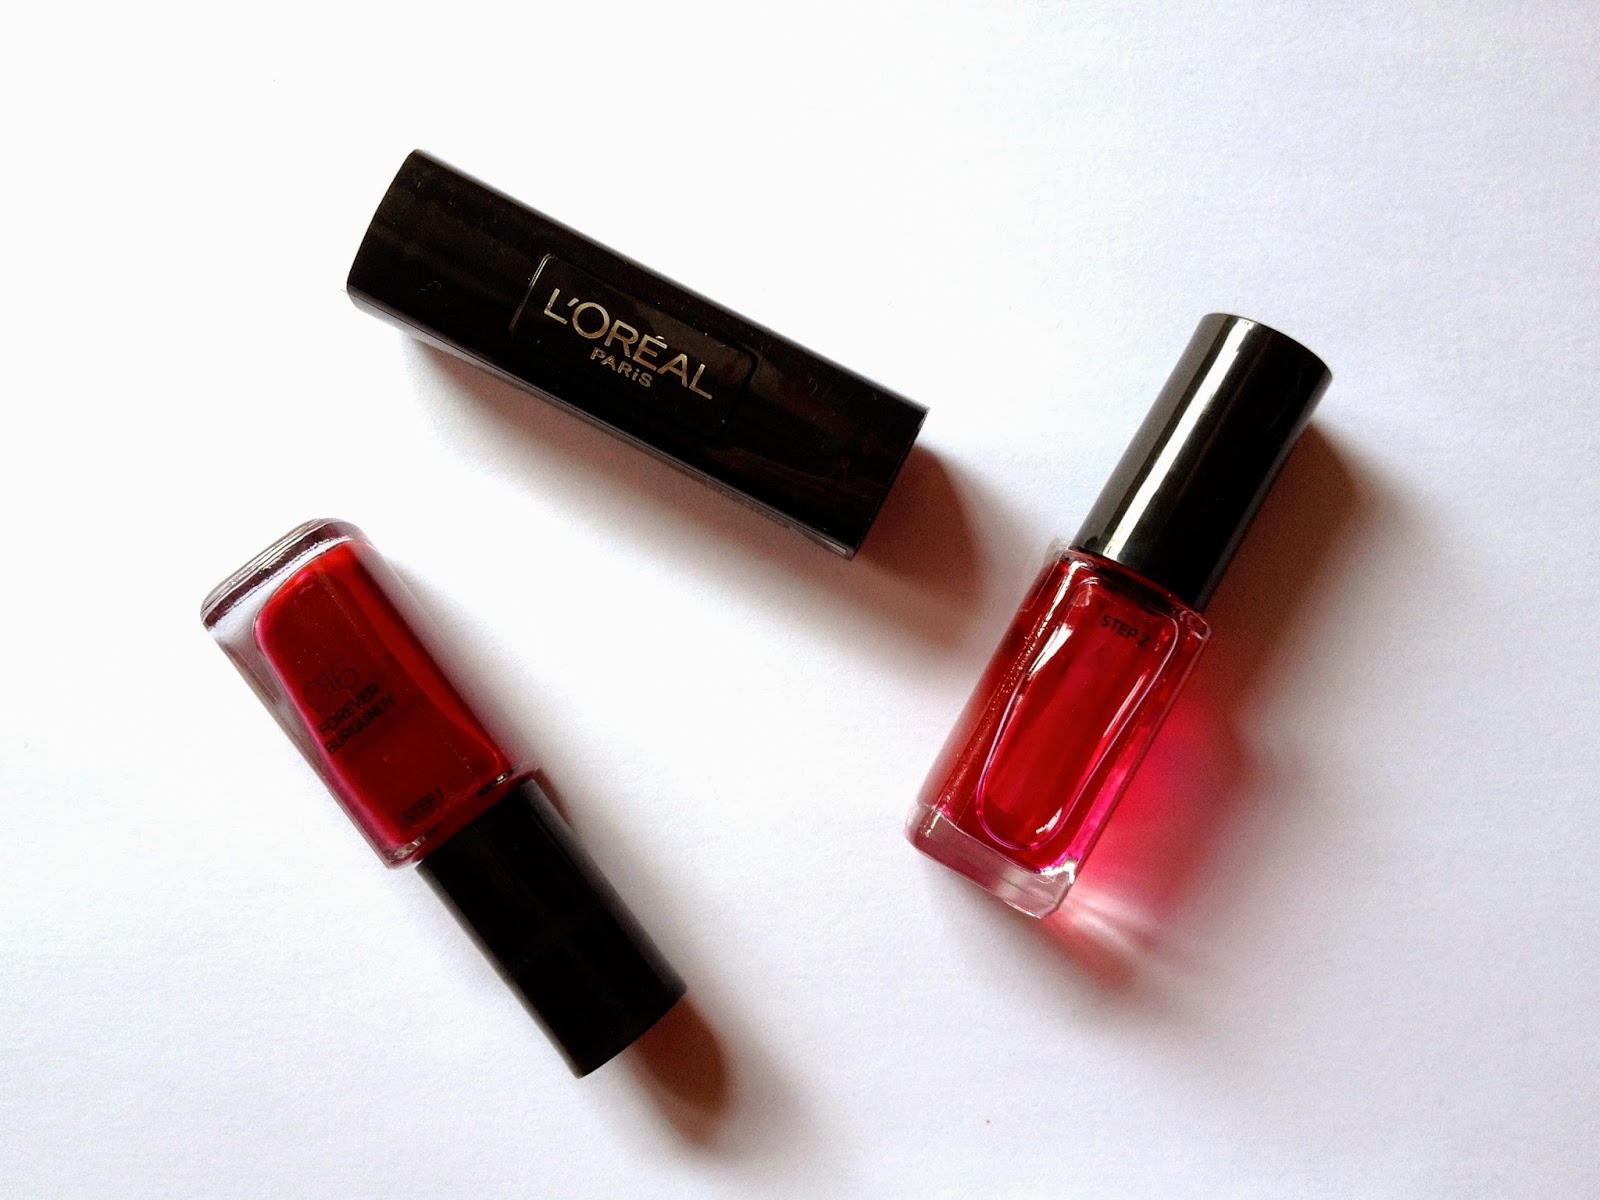 ❤ MAKEUP FOR ETERNITY ❤: L'OREAL Nail Color Vernis '330 Smell The Roses'  Review & Swatches